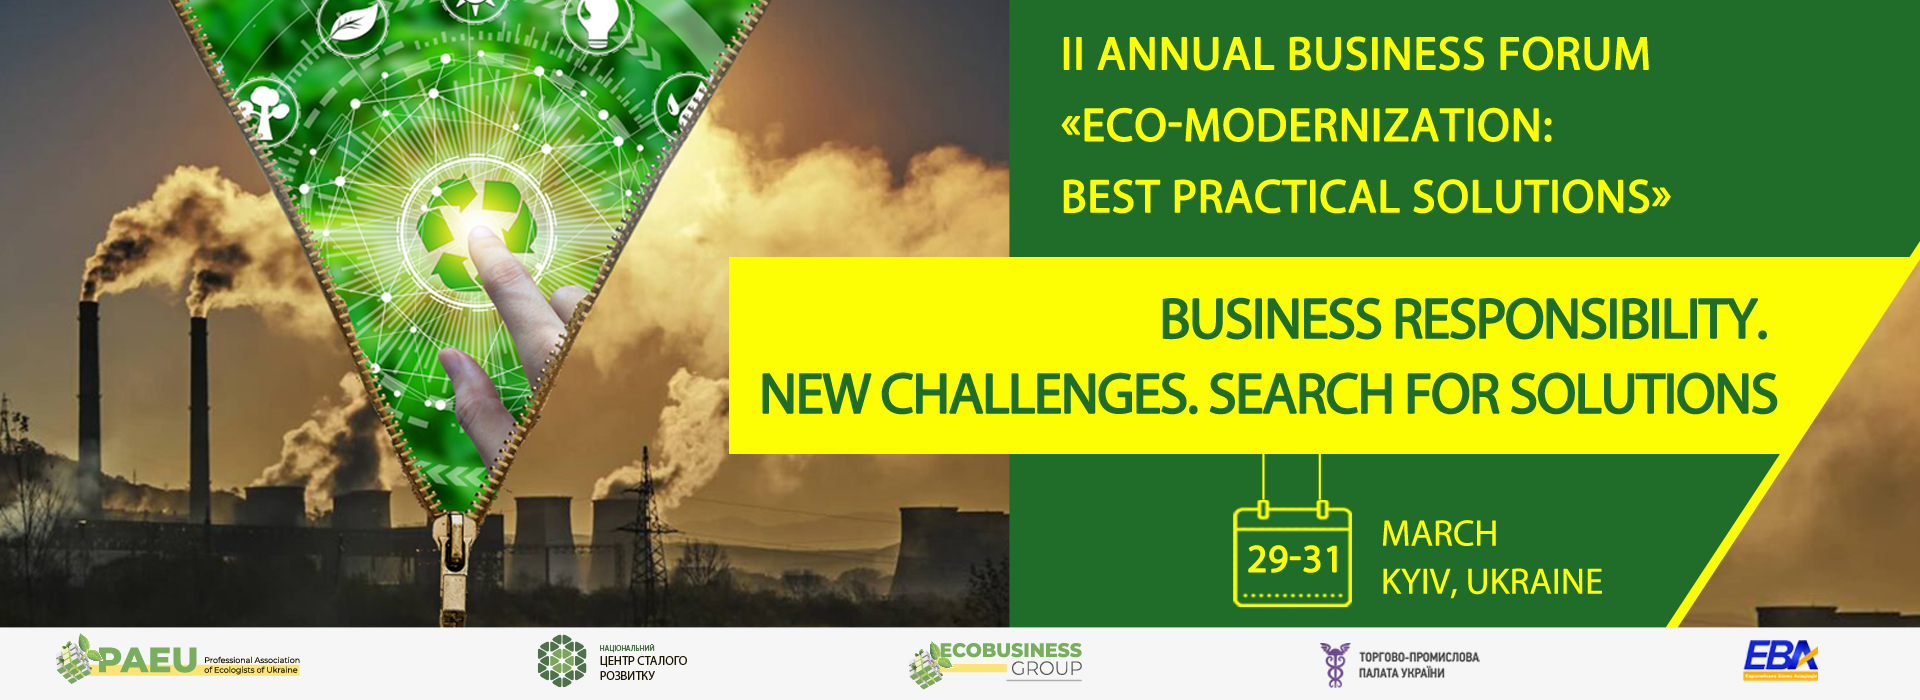 II Annual Business Forum on Industrial Ecology “Ecomodernization-2021: Best Practical Solution”